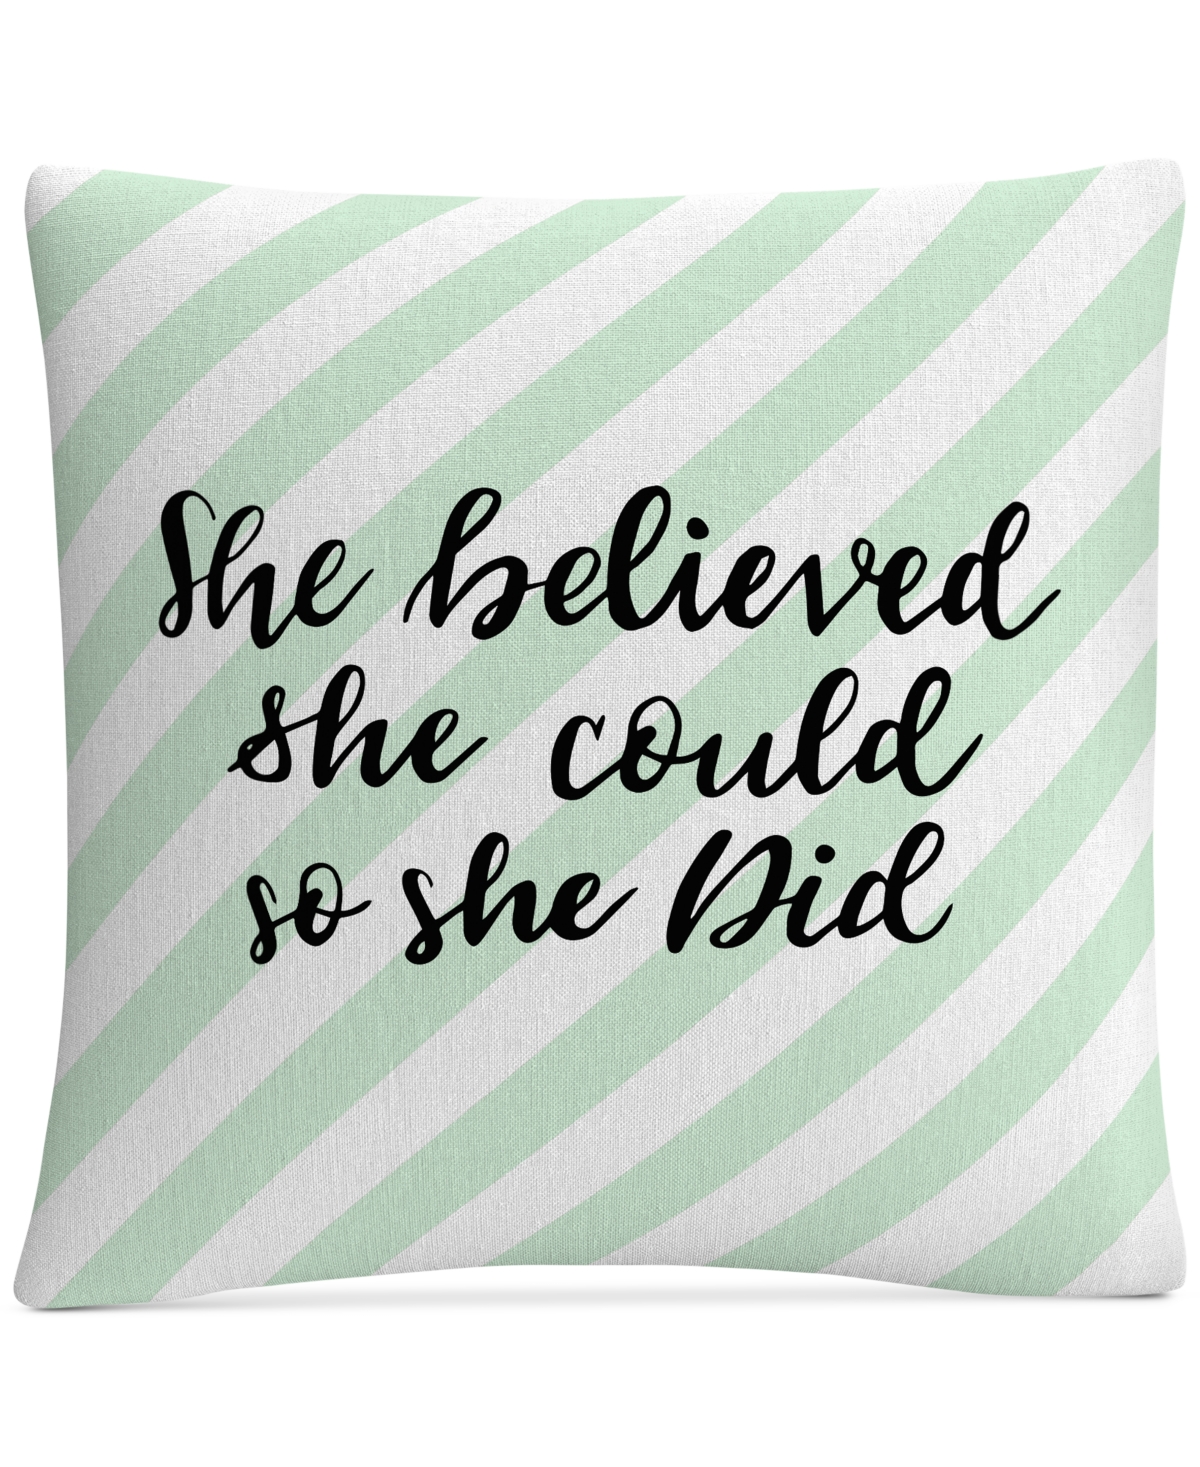 6938749 Abc She Believed She Could Decorative Pillow, 16 x sku 6938749